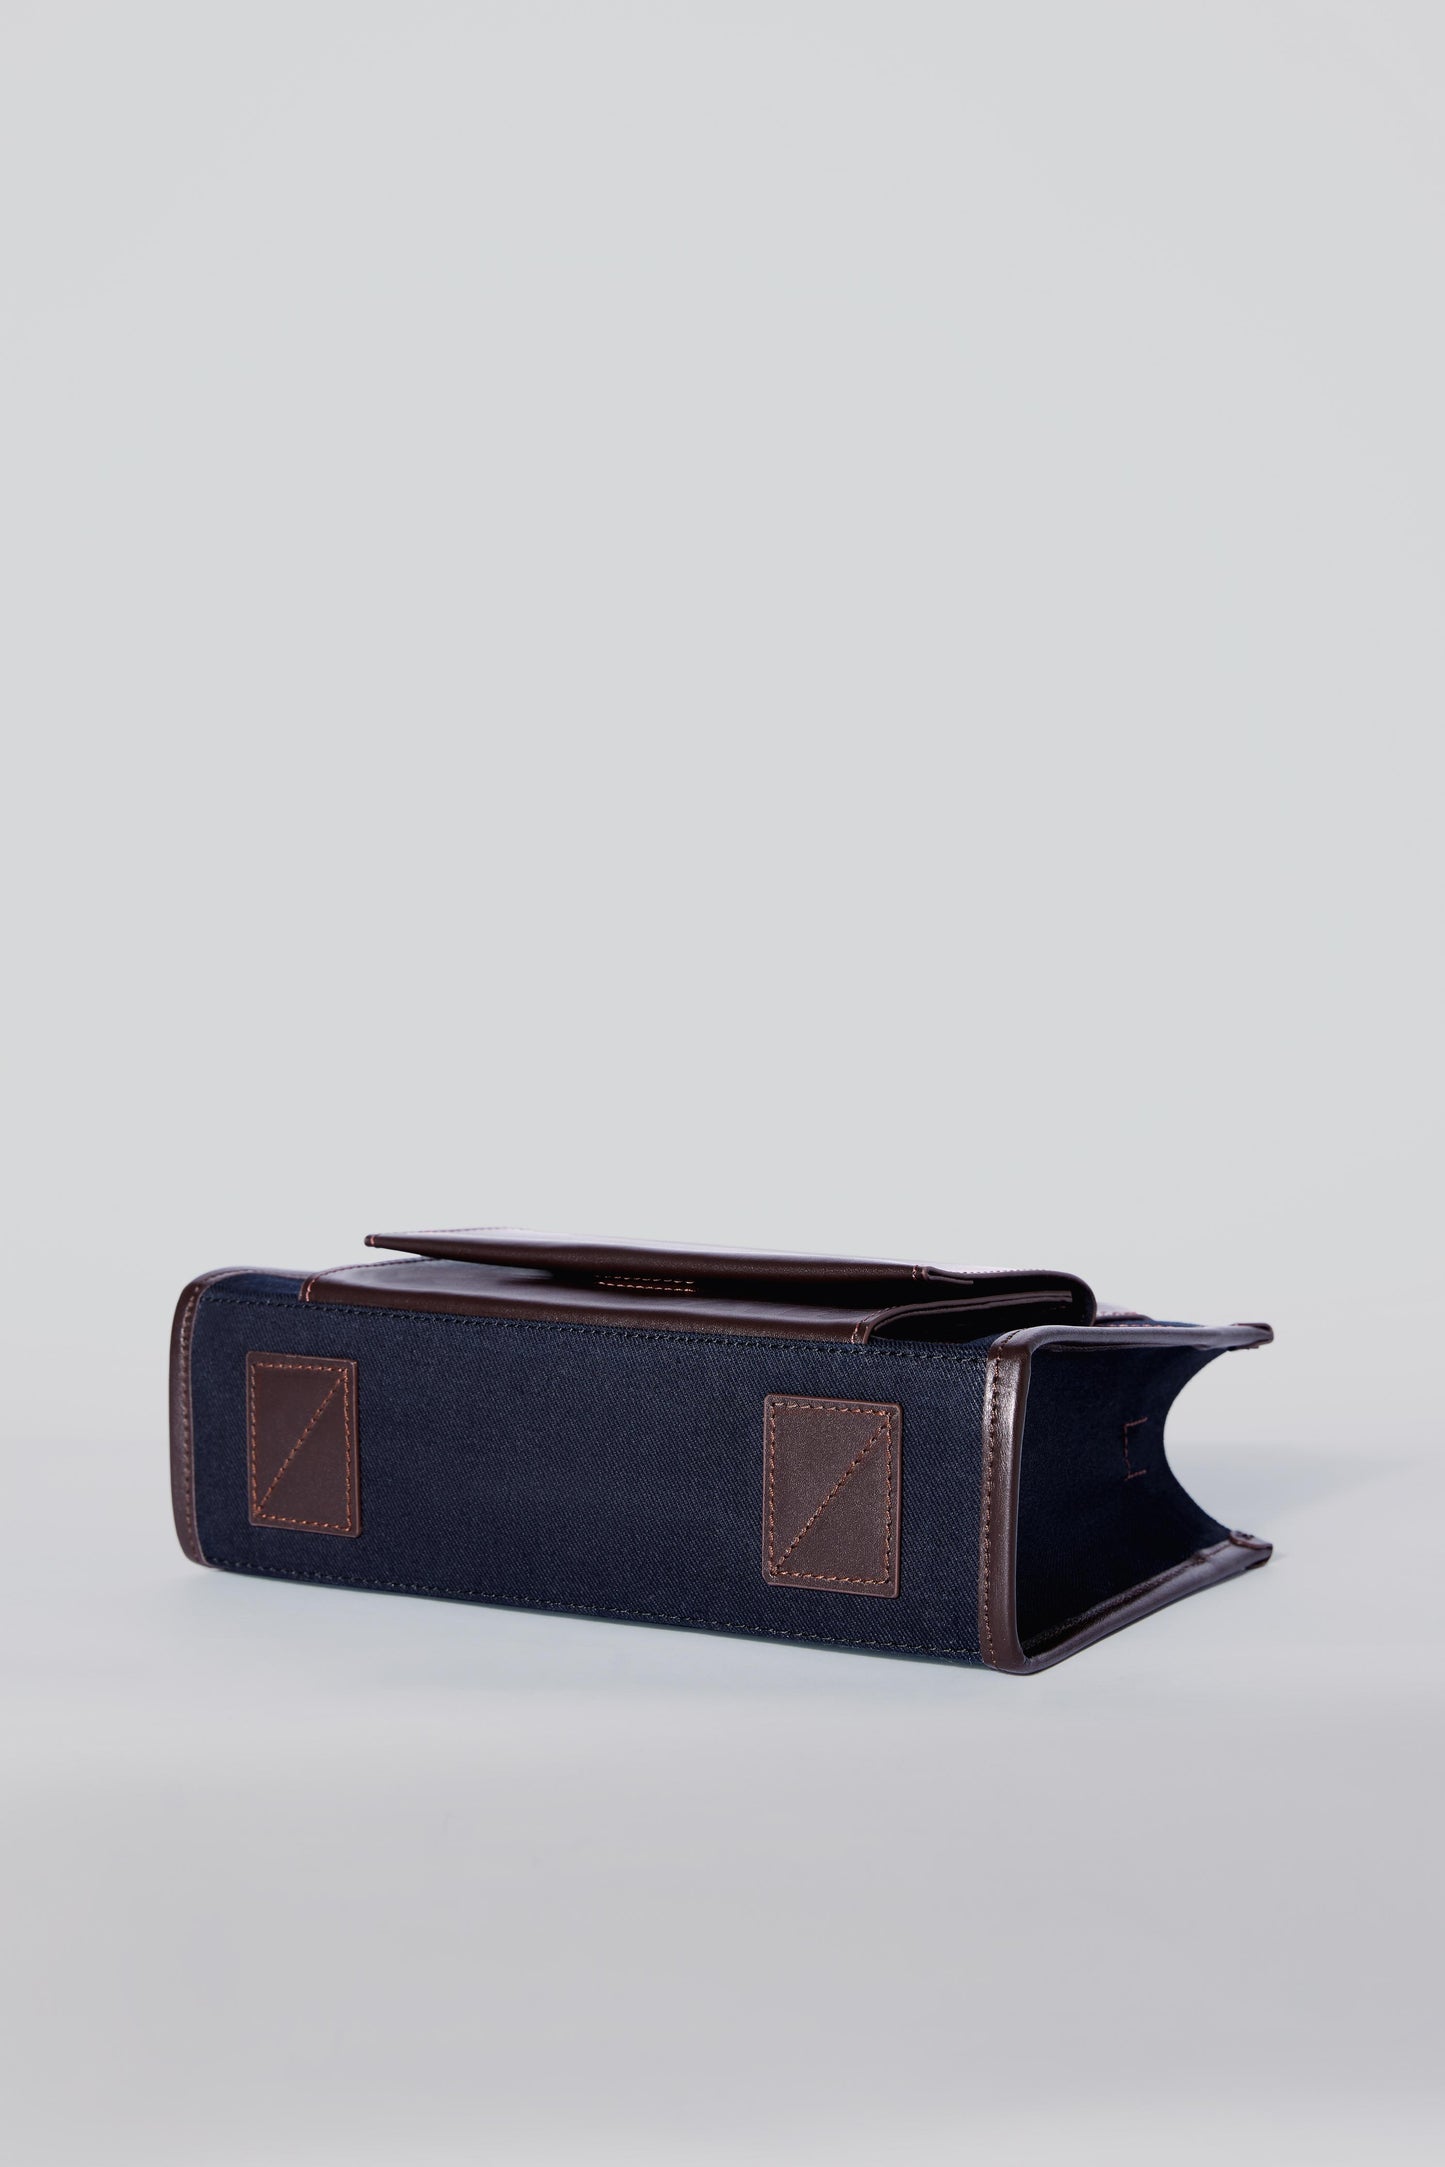 STITCHED POCKET MINI TOTE IN NAVY AND BROWN